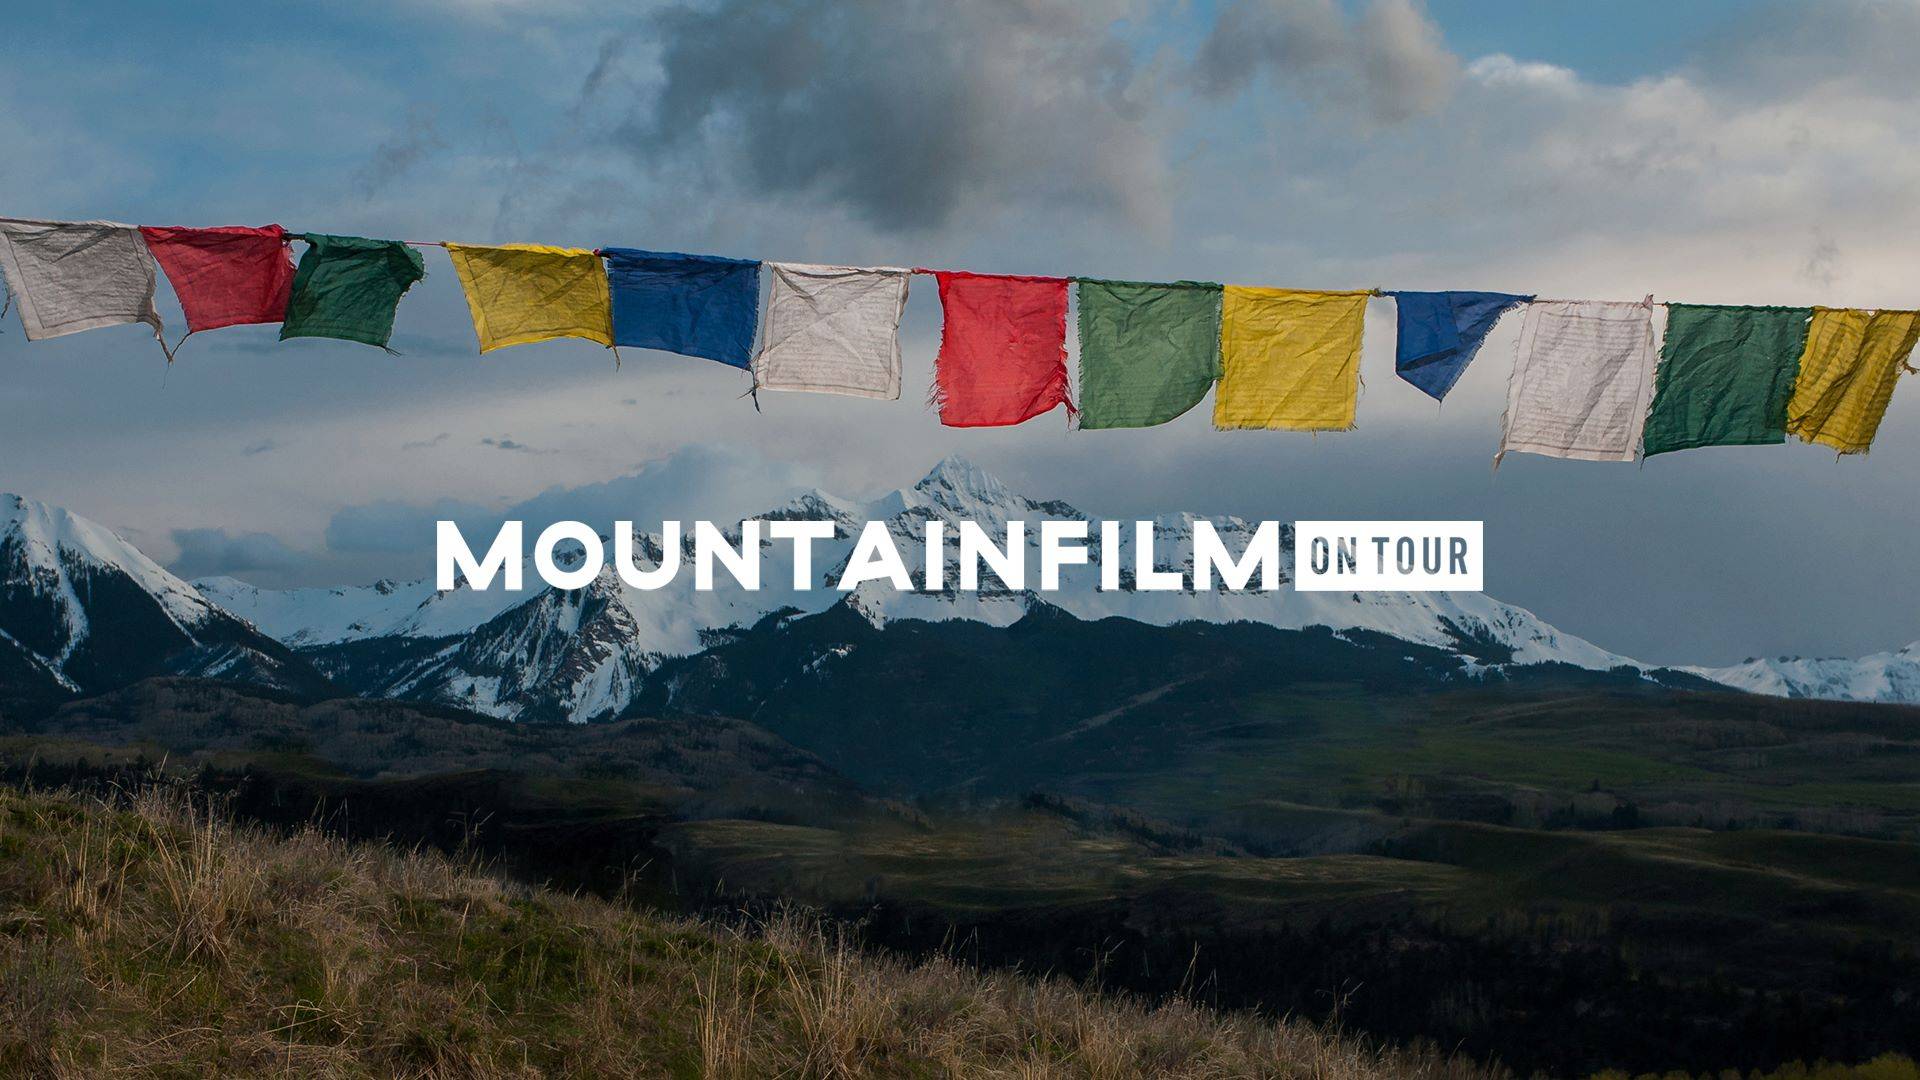 Champaign Outdoors is accepting applications for their Mountainfilm Grant